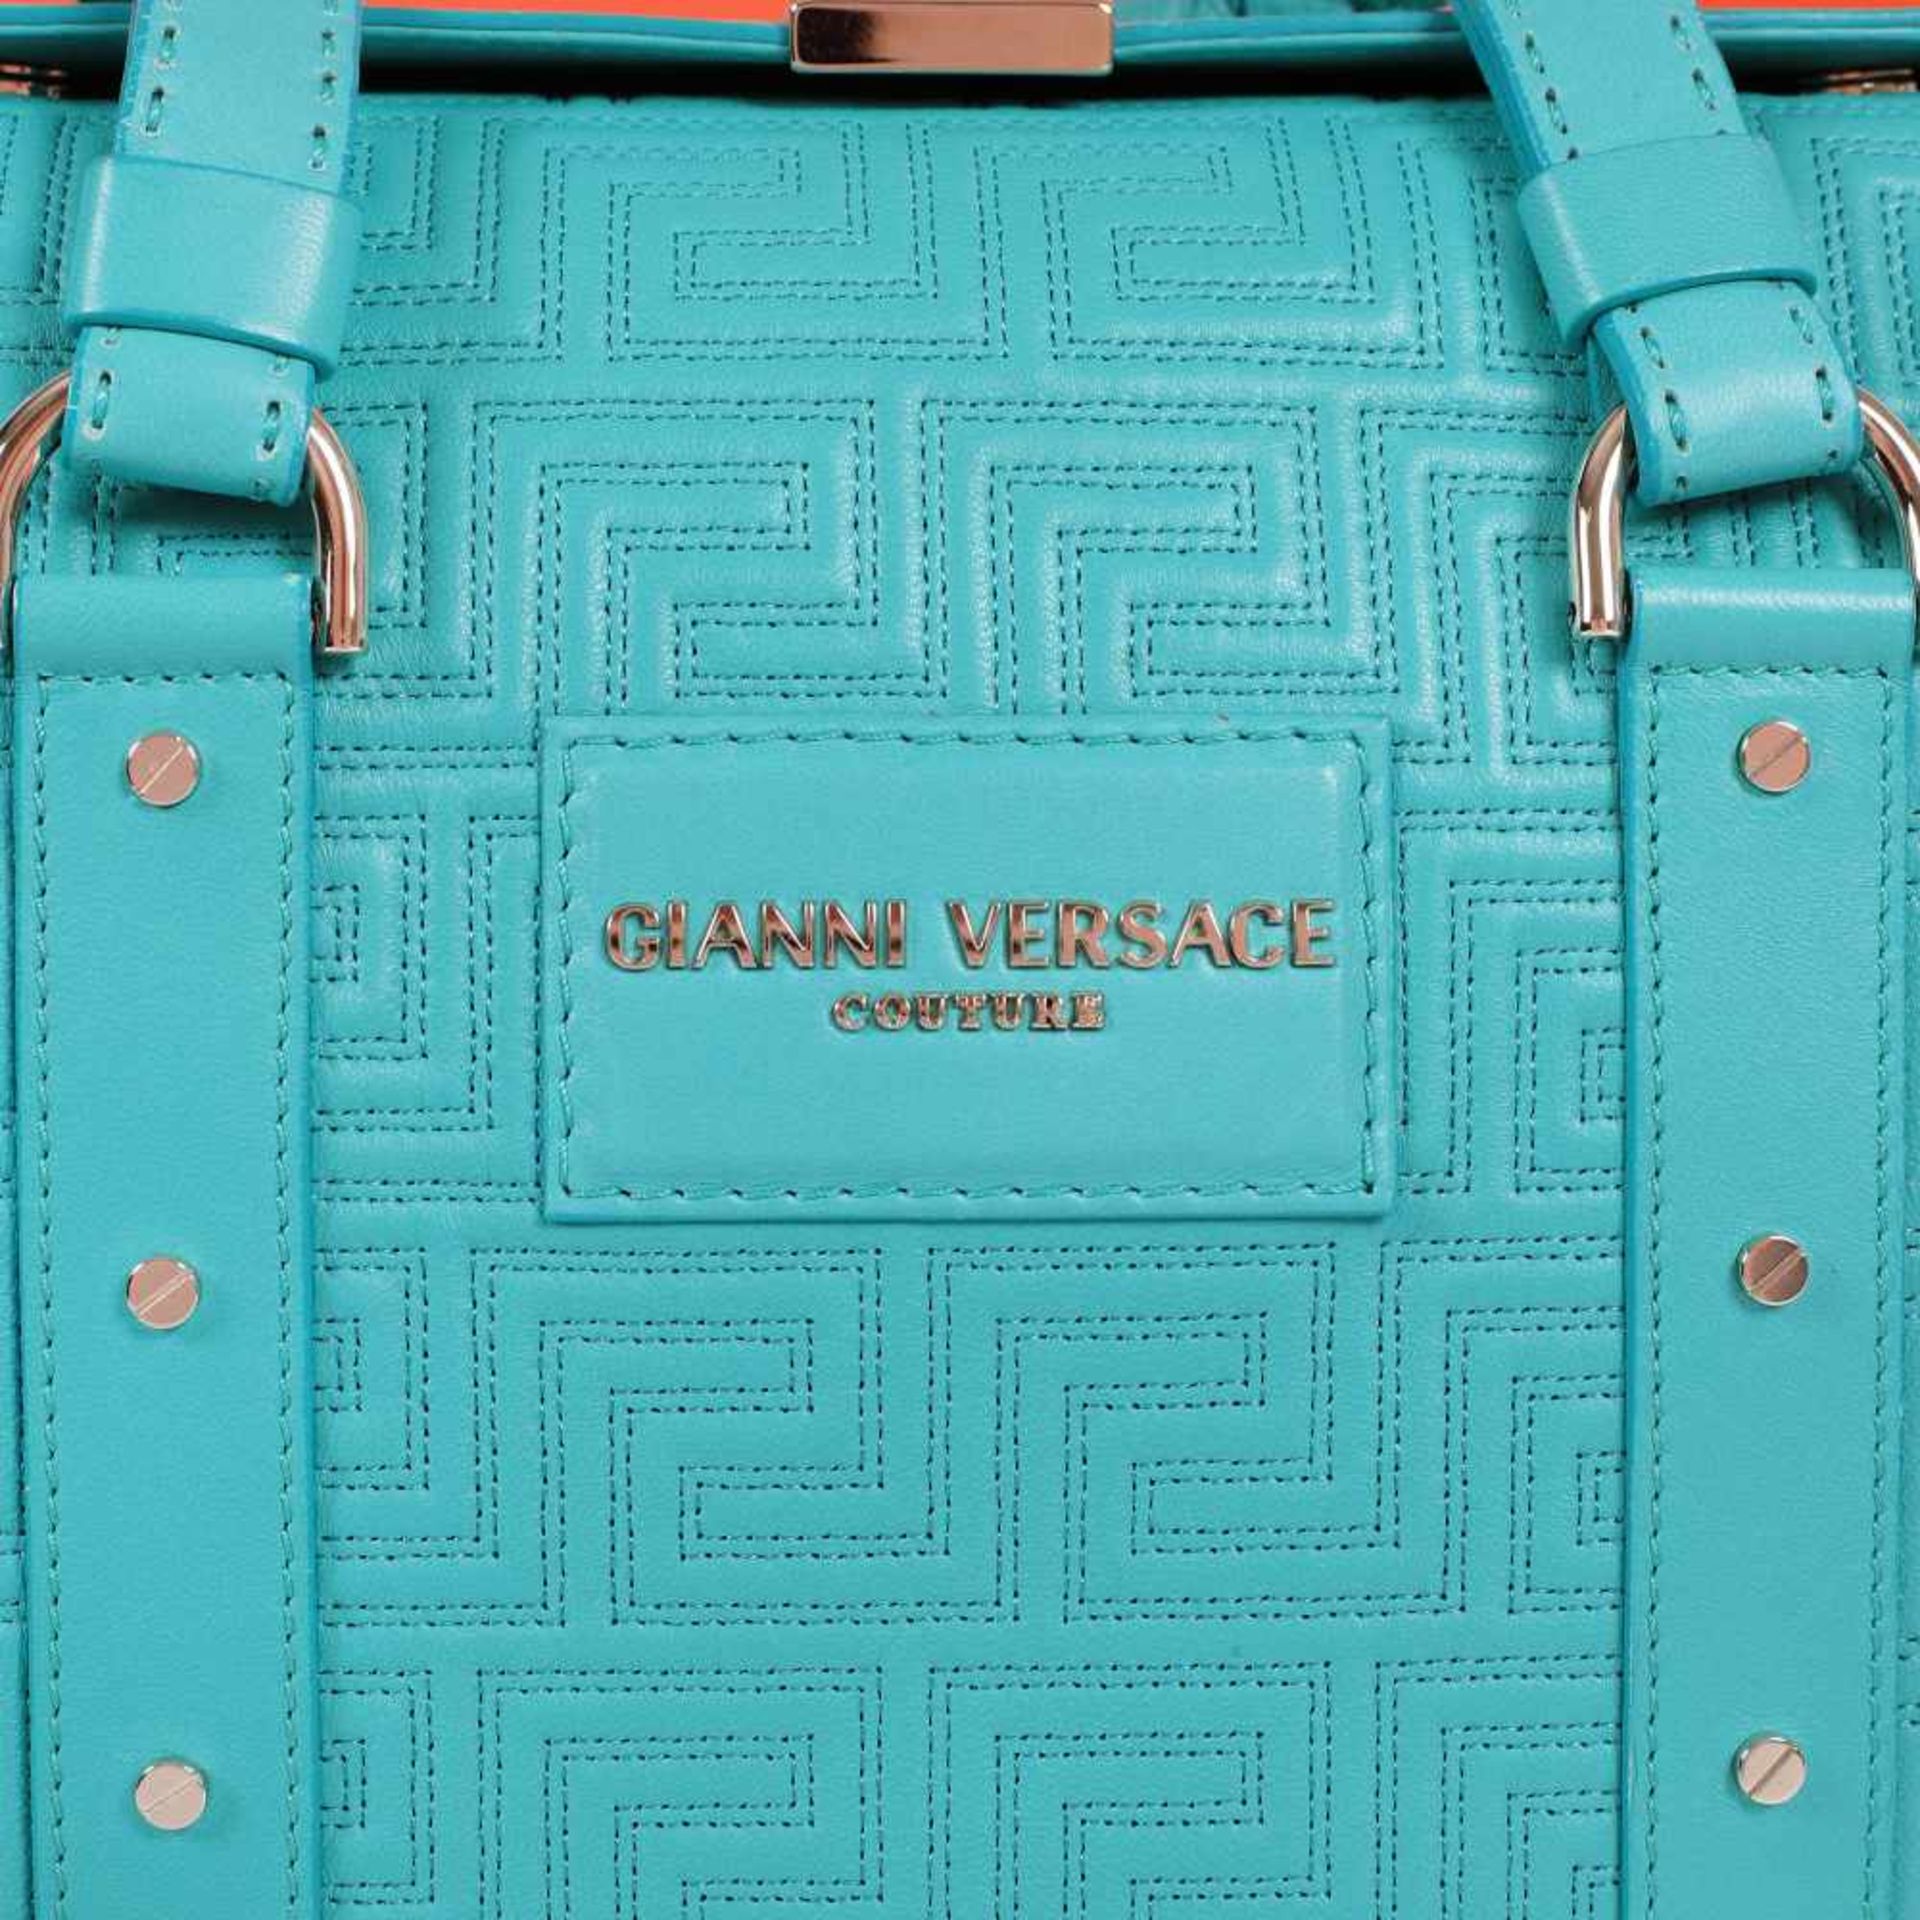 Gianni Versace Couture bag, leather, with greca motif, turquoise, for women - Image 4 of 7